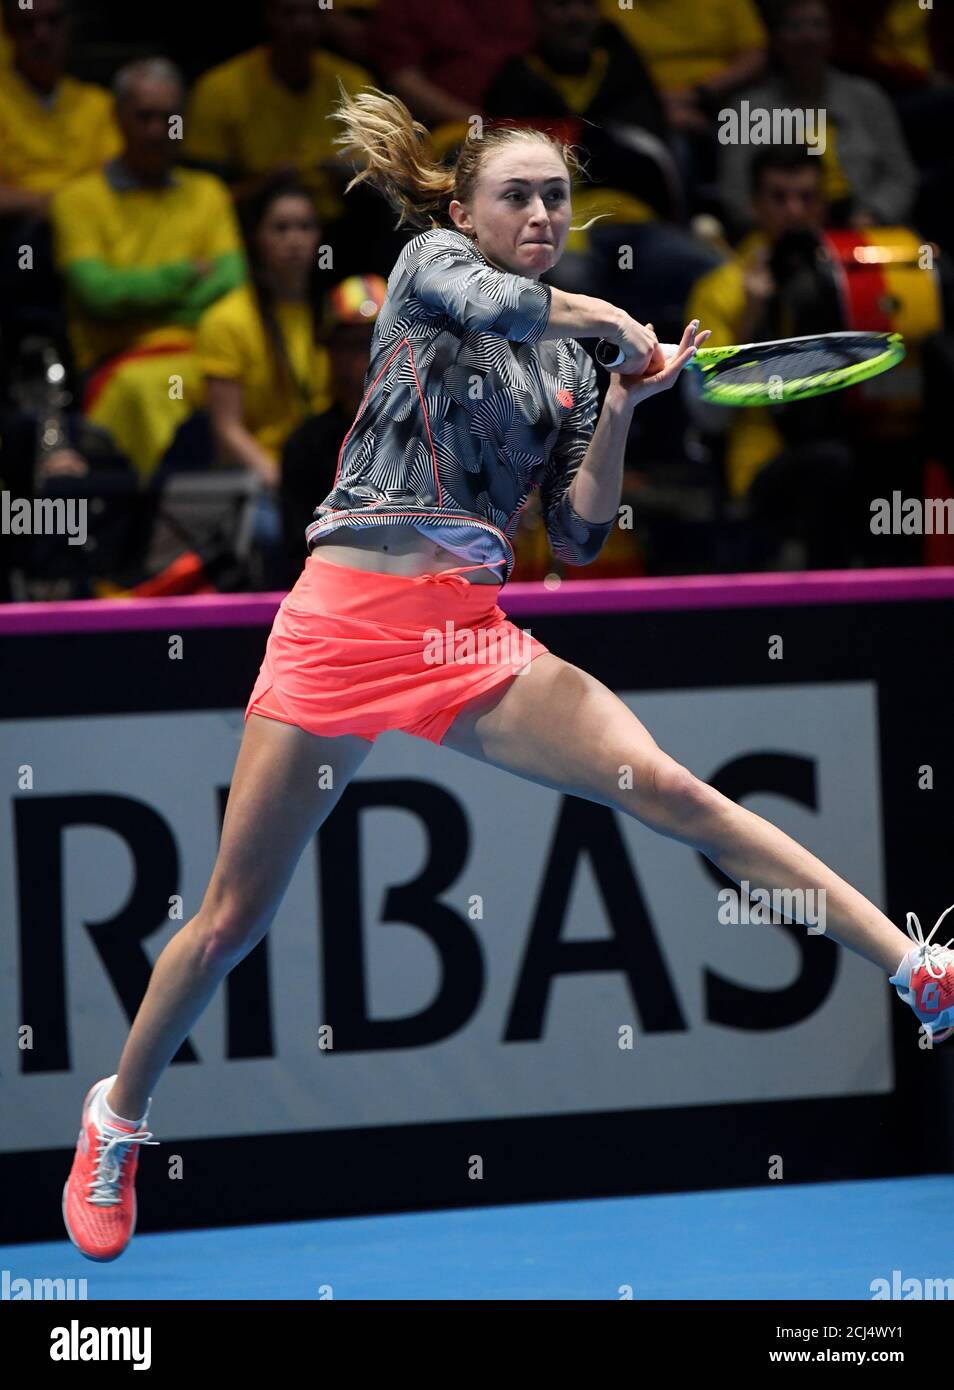 Tennis - Fed Cup - Fed Cup World Group - First Round - Germany v Belarus -  Volkswagen Halle Braunschweig, Braunschweig, Germany - February 9, 2019  Belarus' Aliaksandra Sasnovich in action during